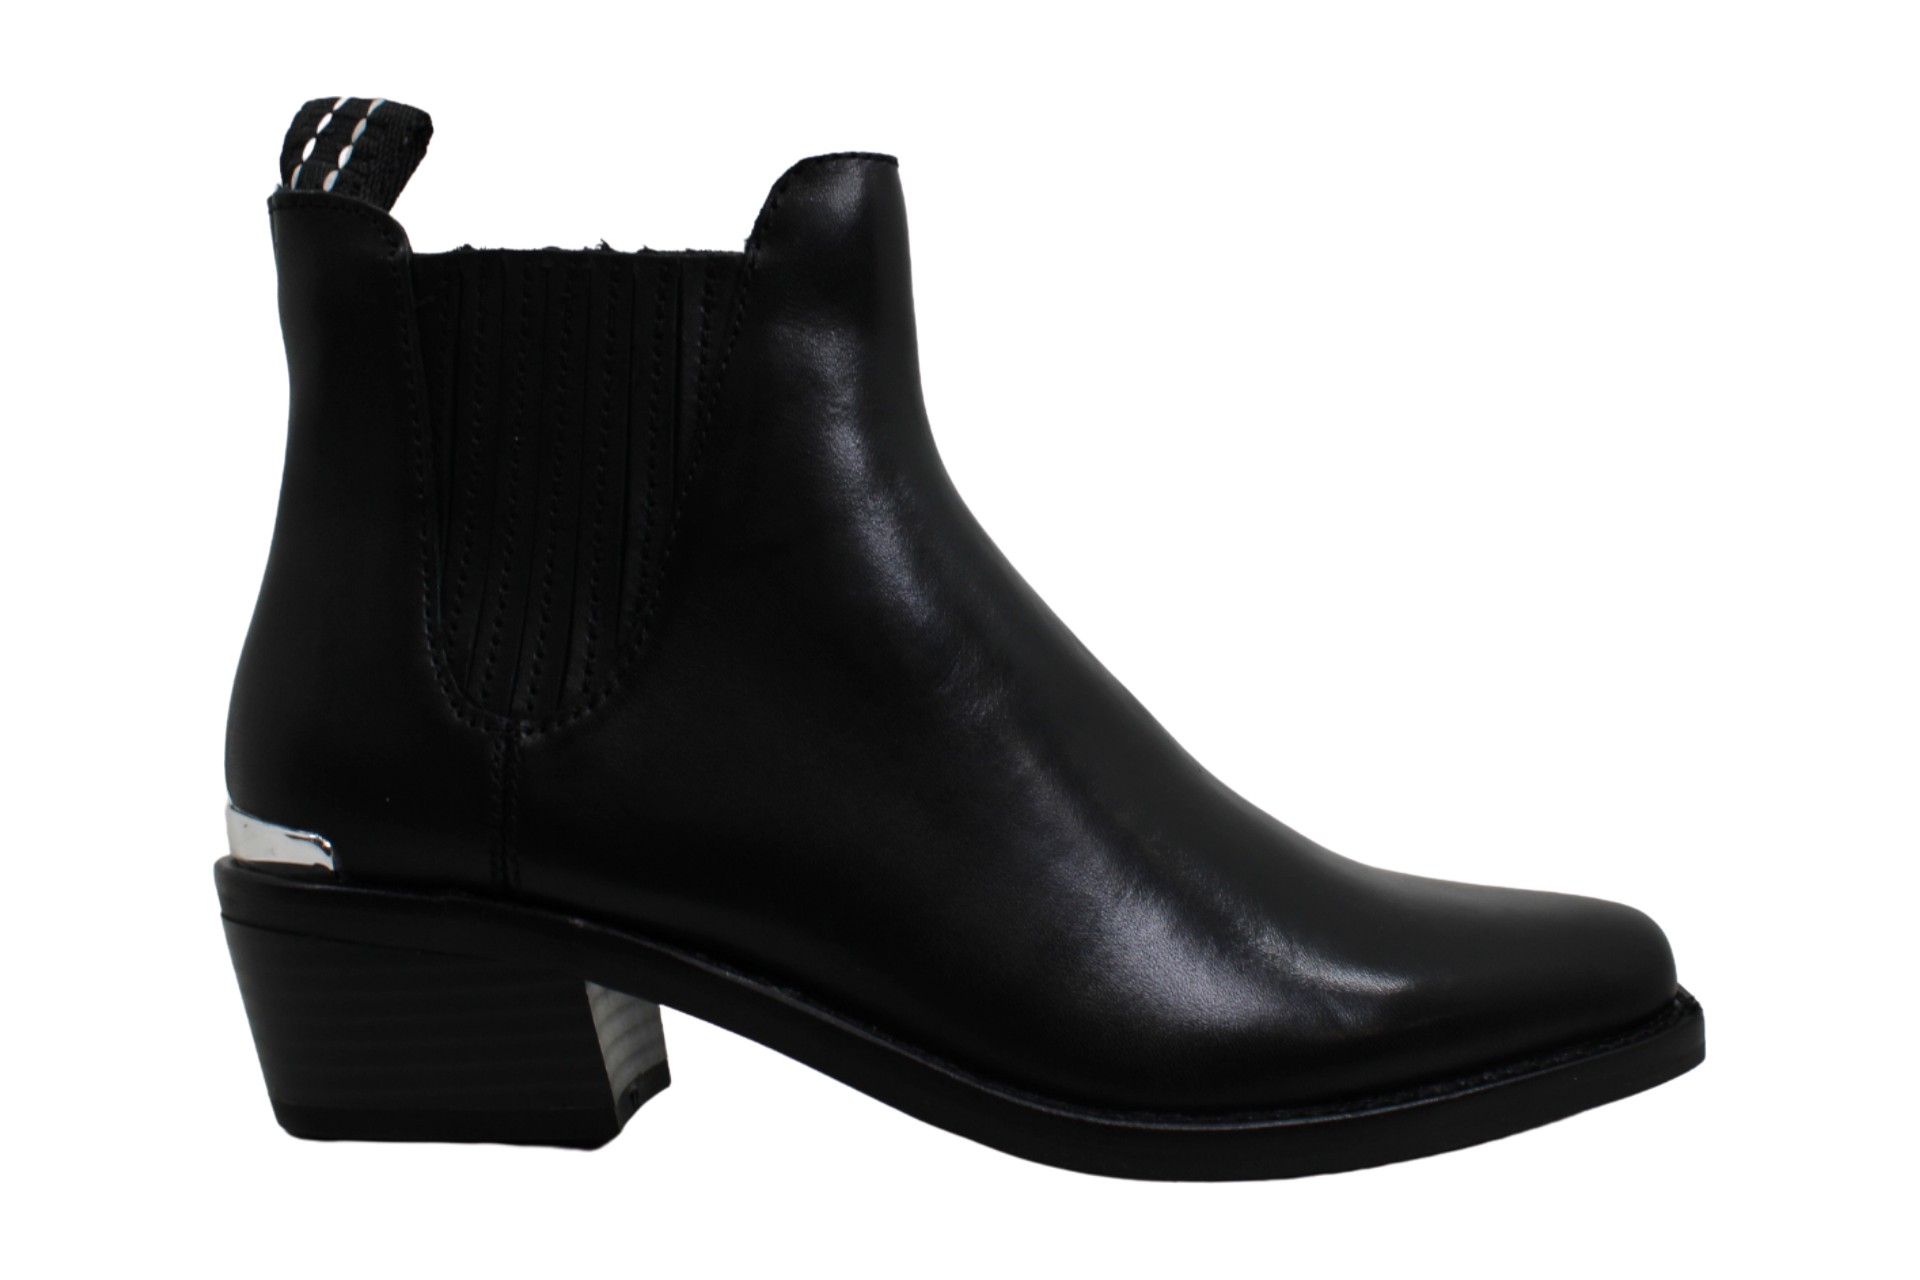 DKNY WOMENS MICHELLE Leather Closed Toe Ankle Chelsea Boots $56.58 ...